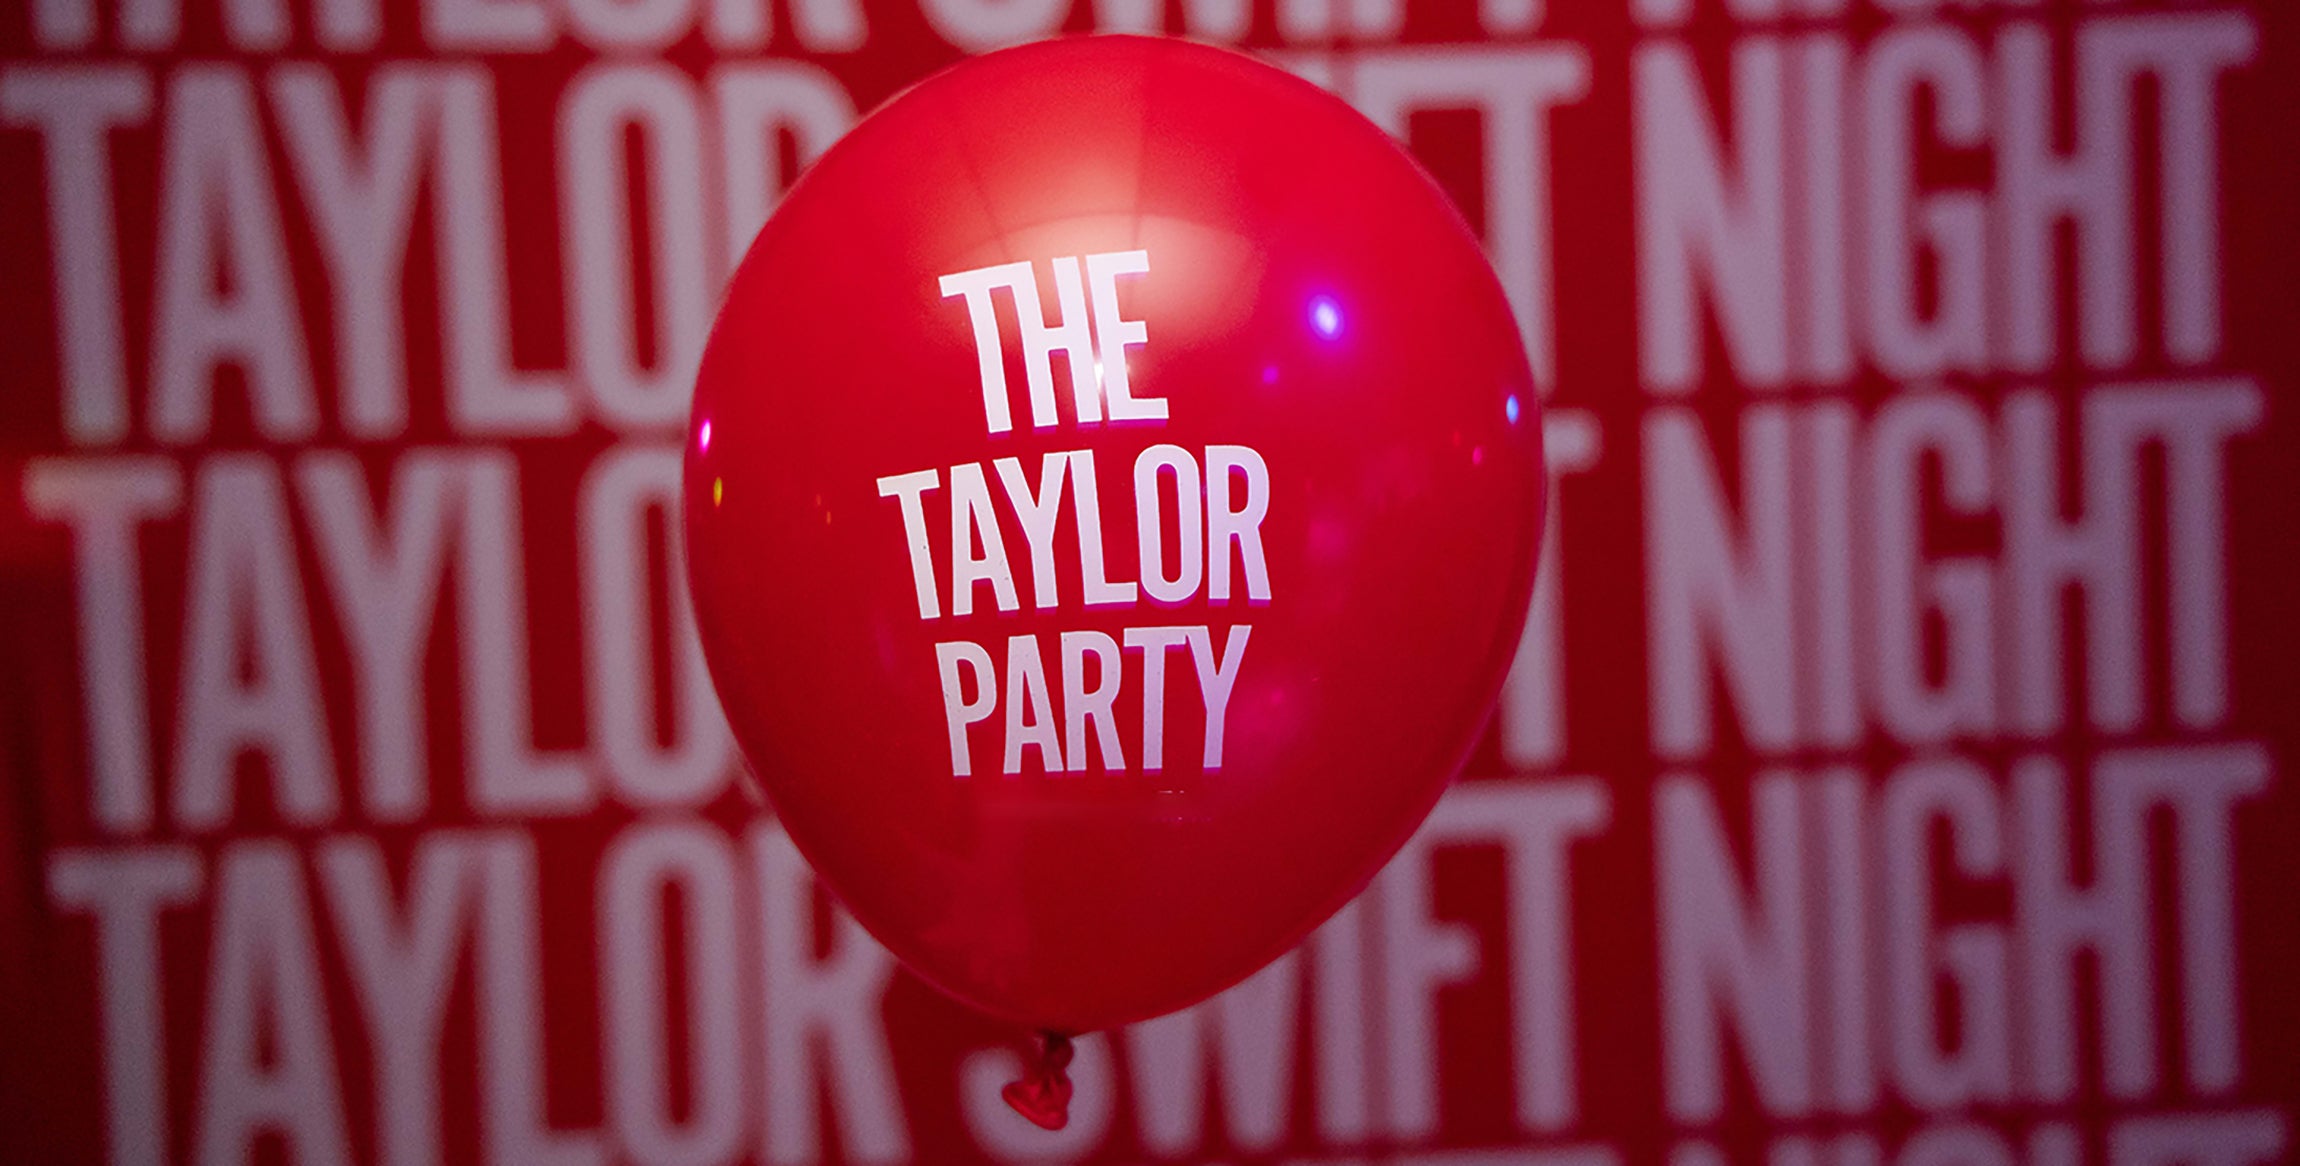 The Taylor Party: Taylor Swift Night - (18+) presale passcode for legit tickets in Minneapolis